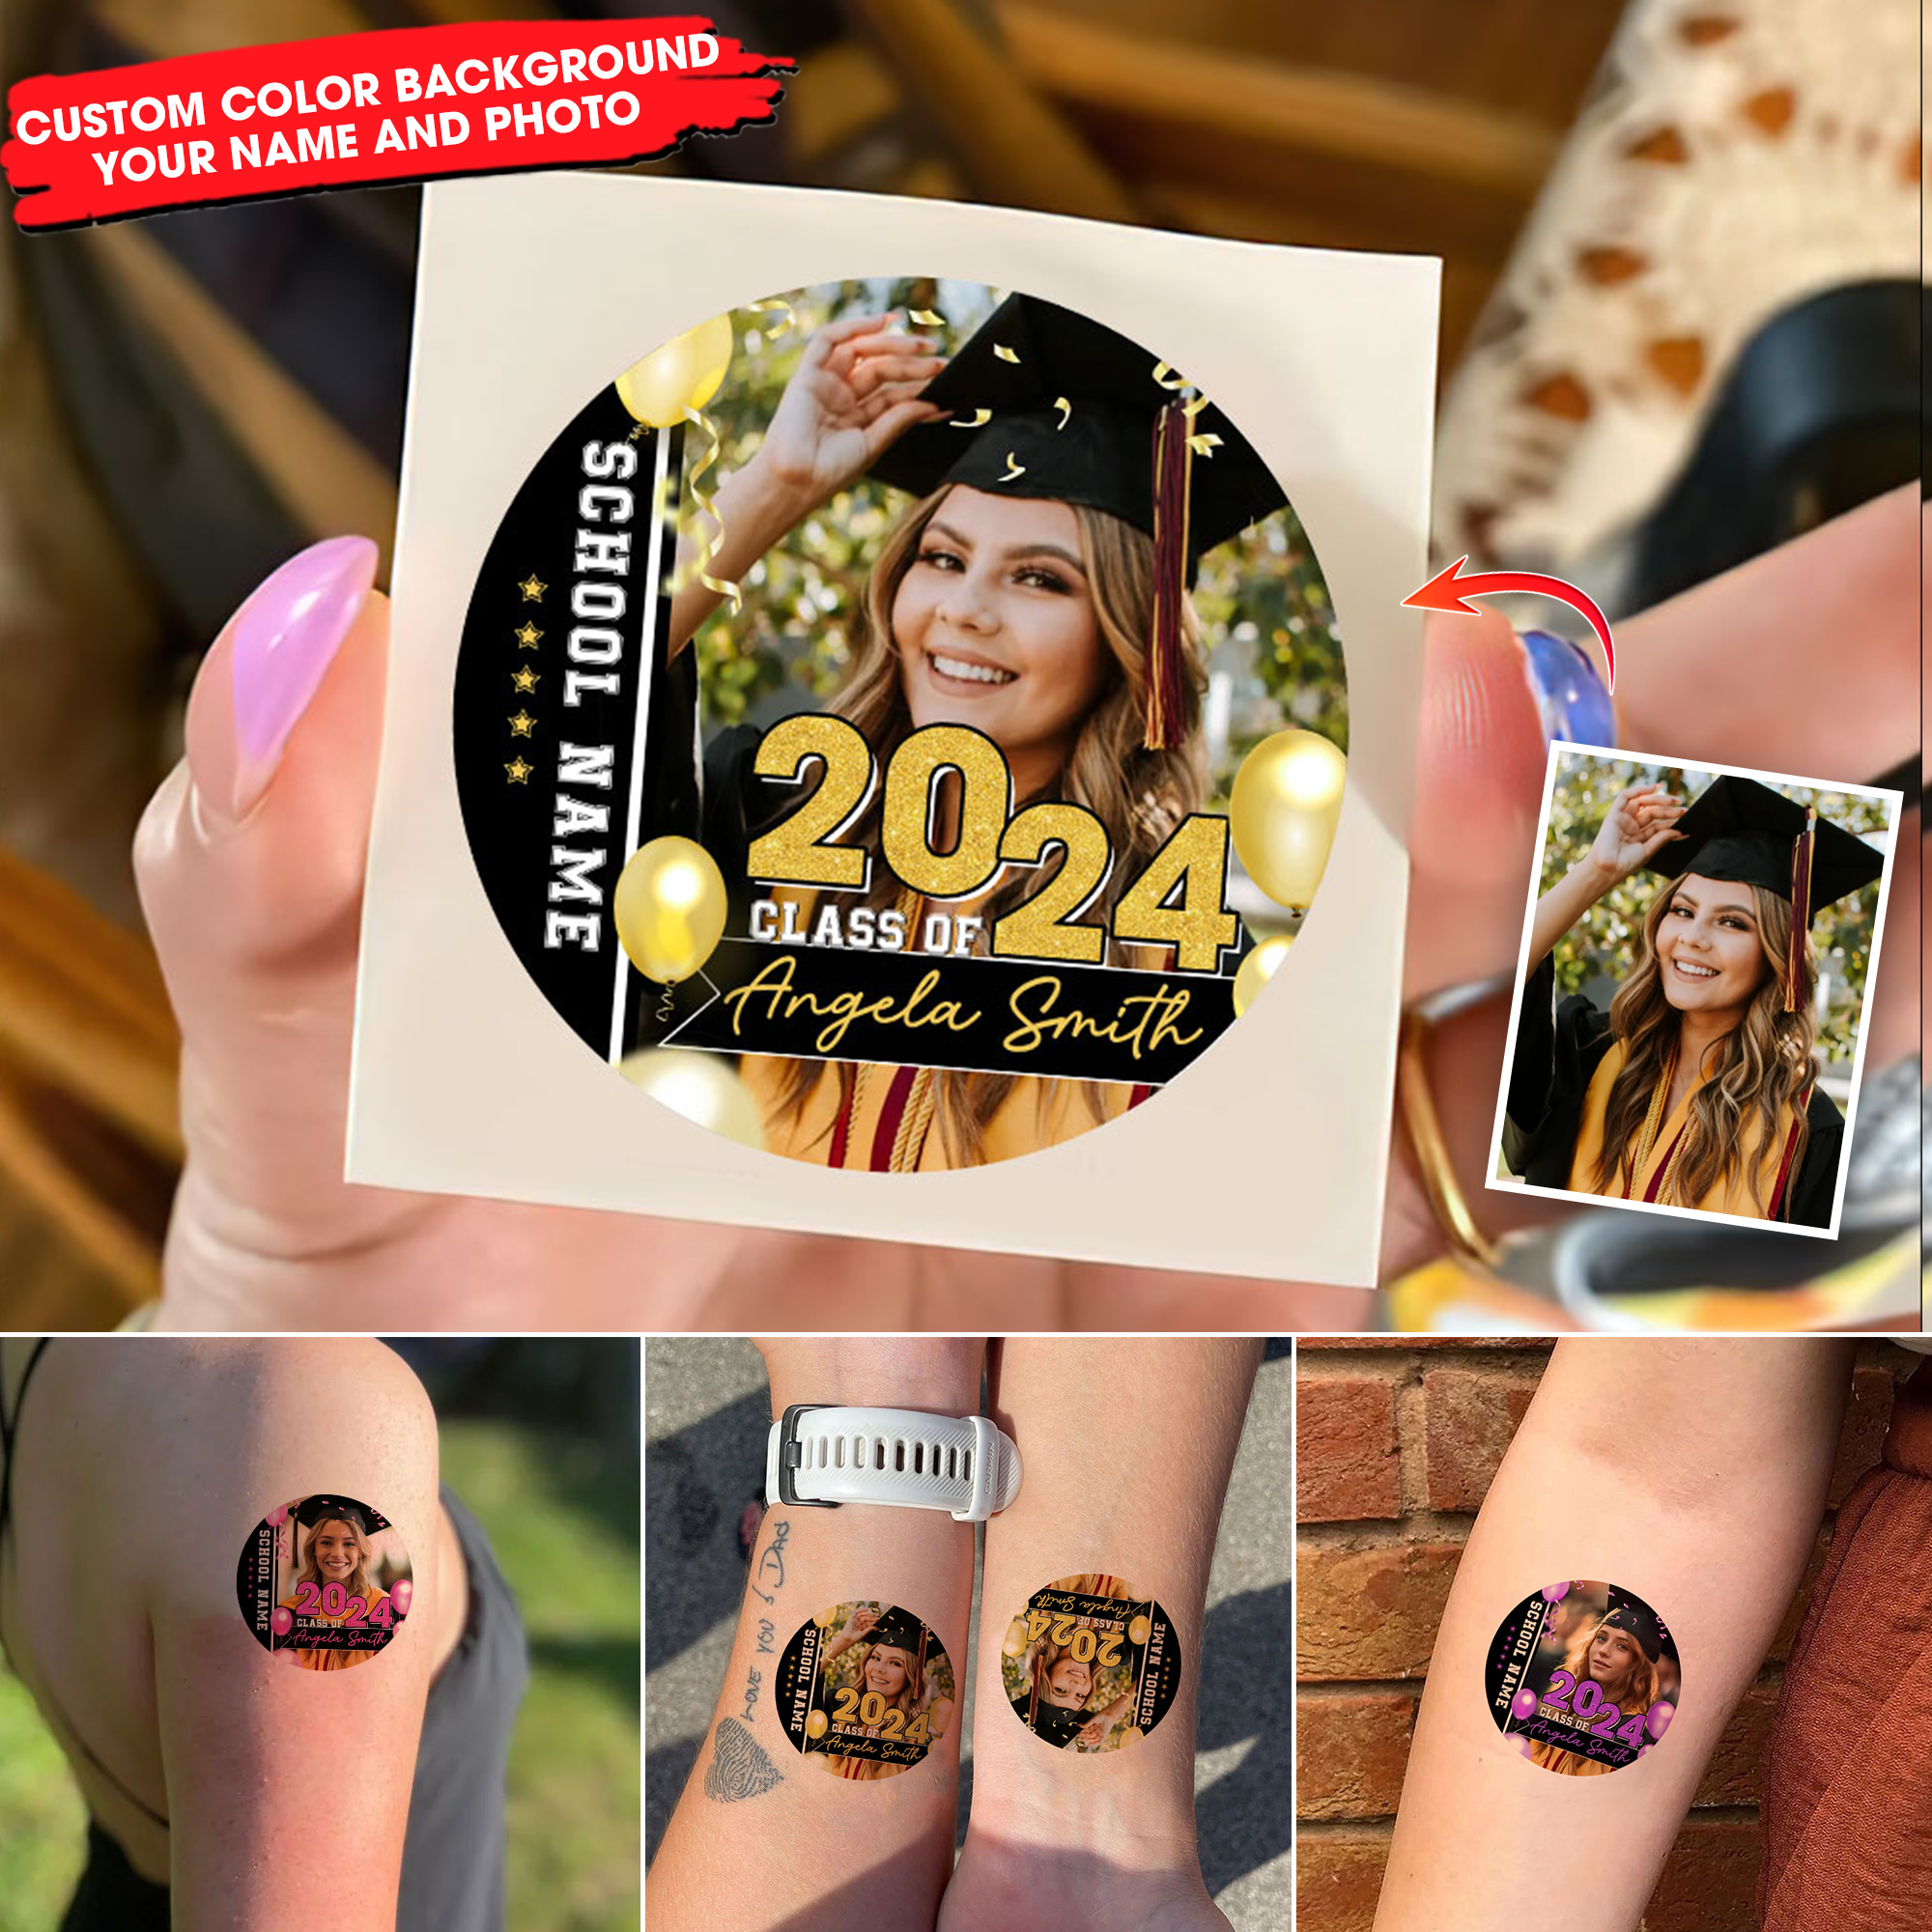 Class Of 2024, Custom Color,  Your Photo And Name Temporary Circle Tattoo, Personalized Photo And Name, Fake Tattoo, Graduation Gift